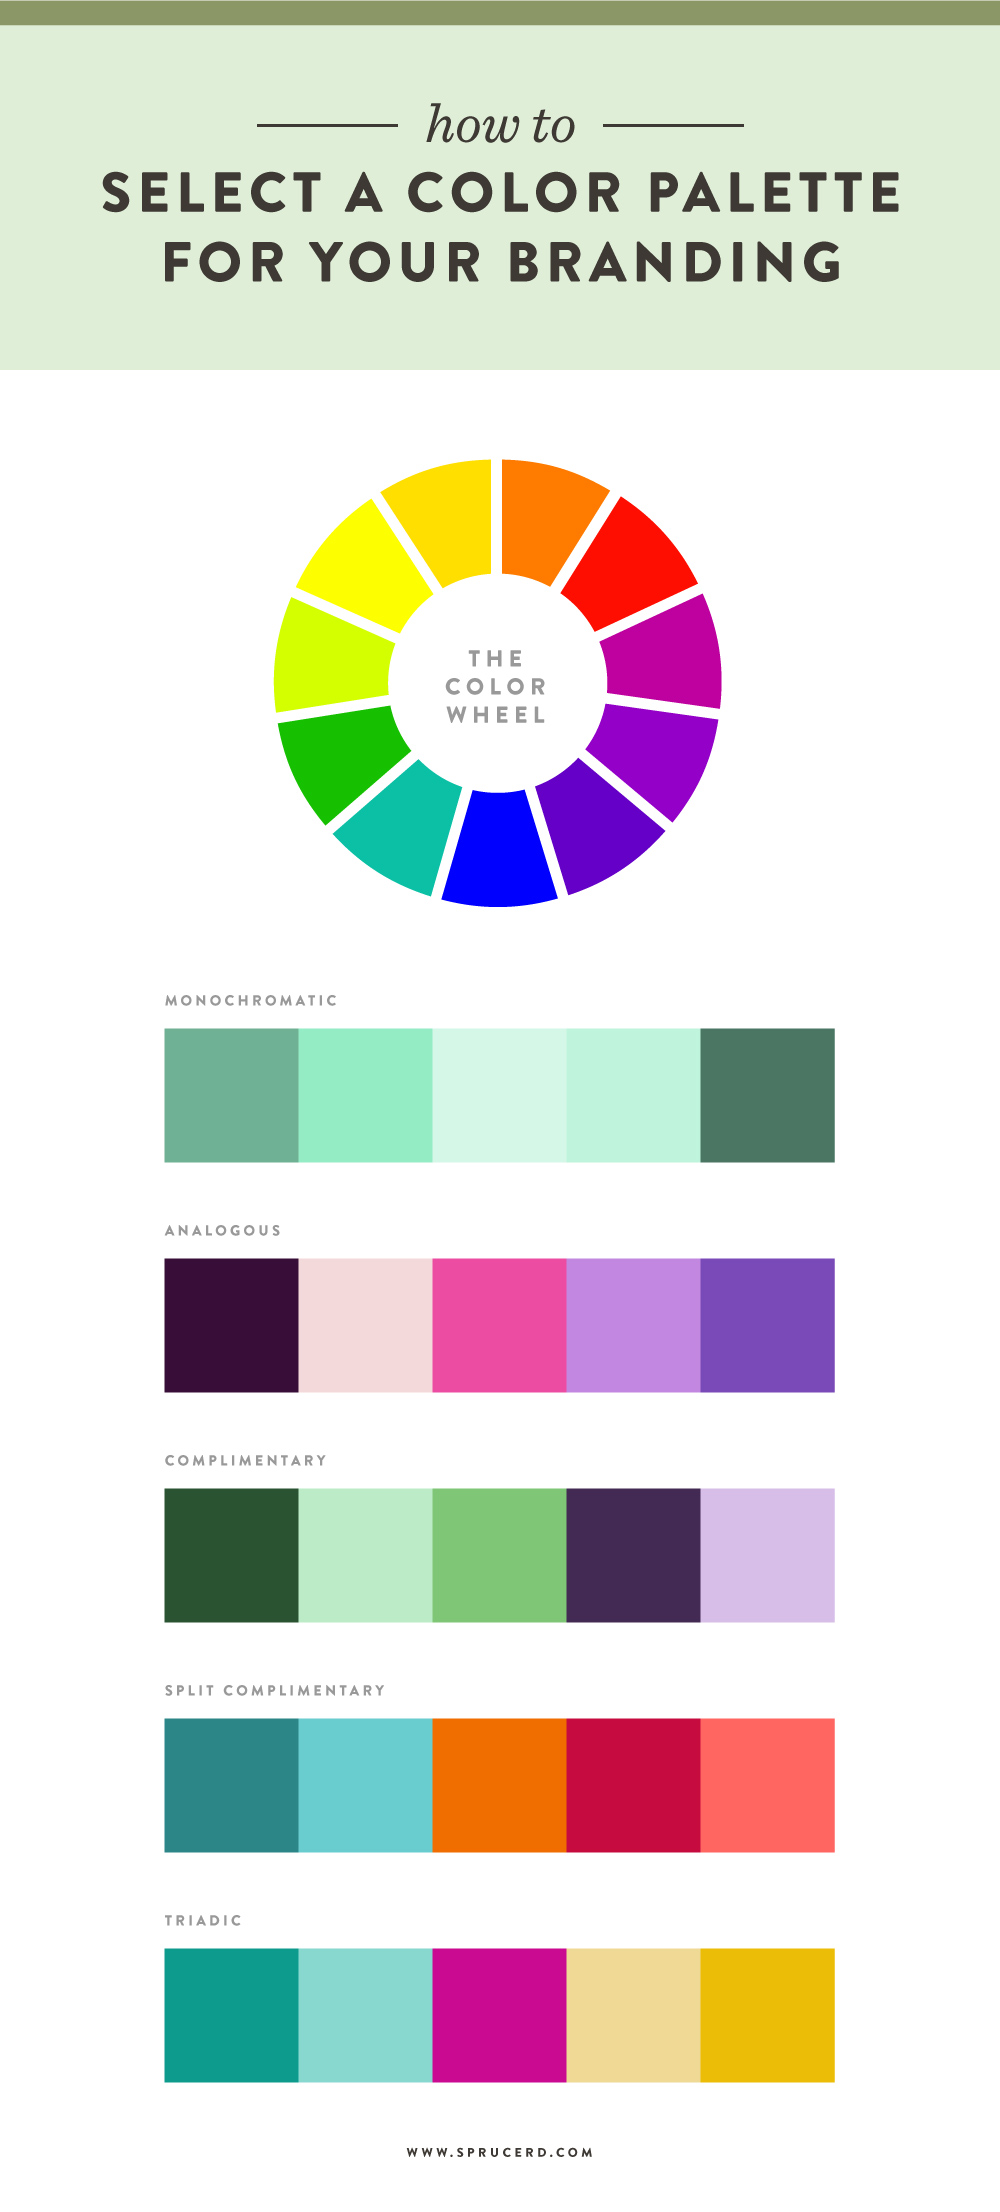 50+ Examples of Movie Color Palettes | Movie color palette, Color in film, Color theory